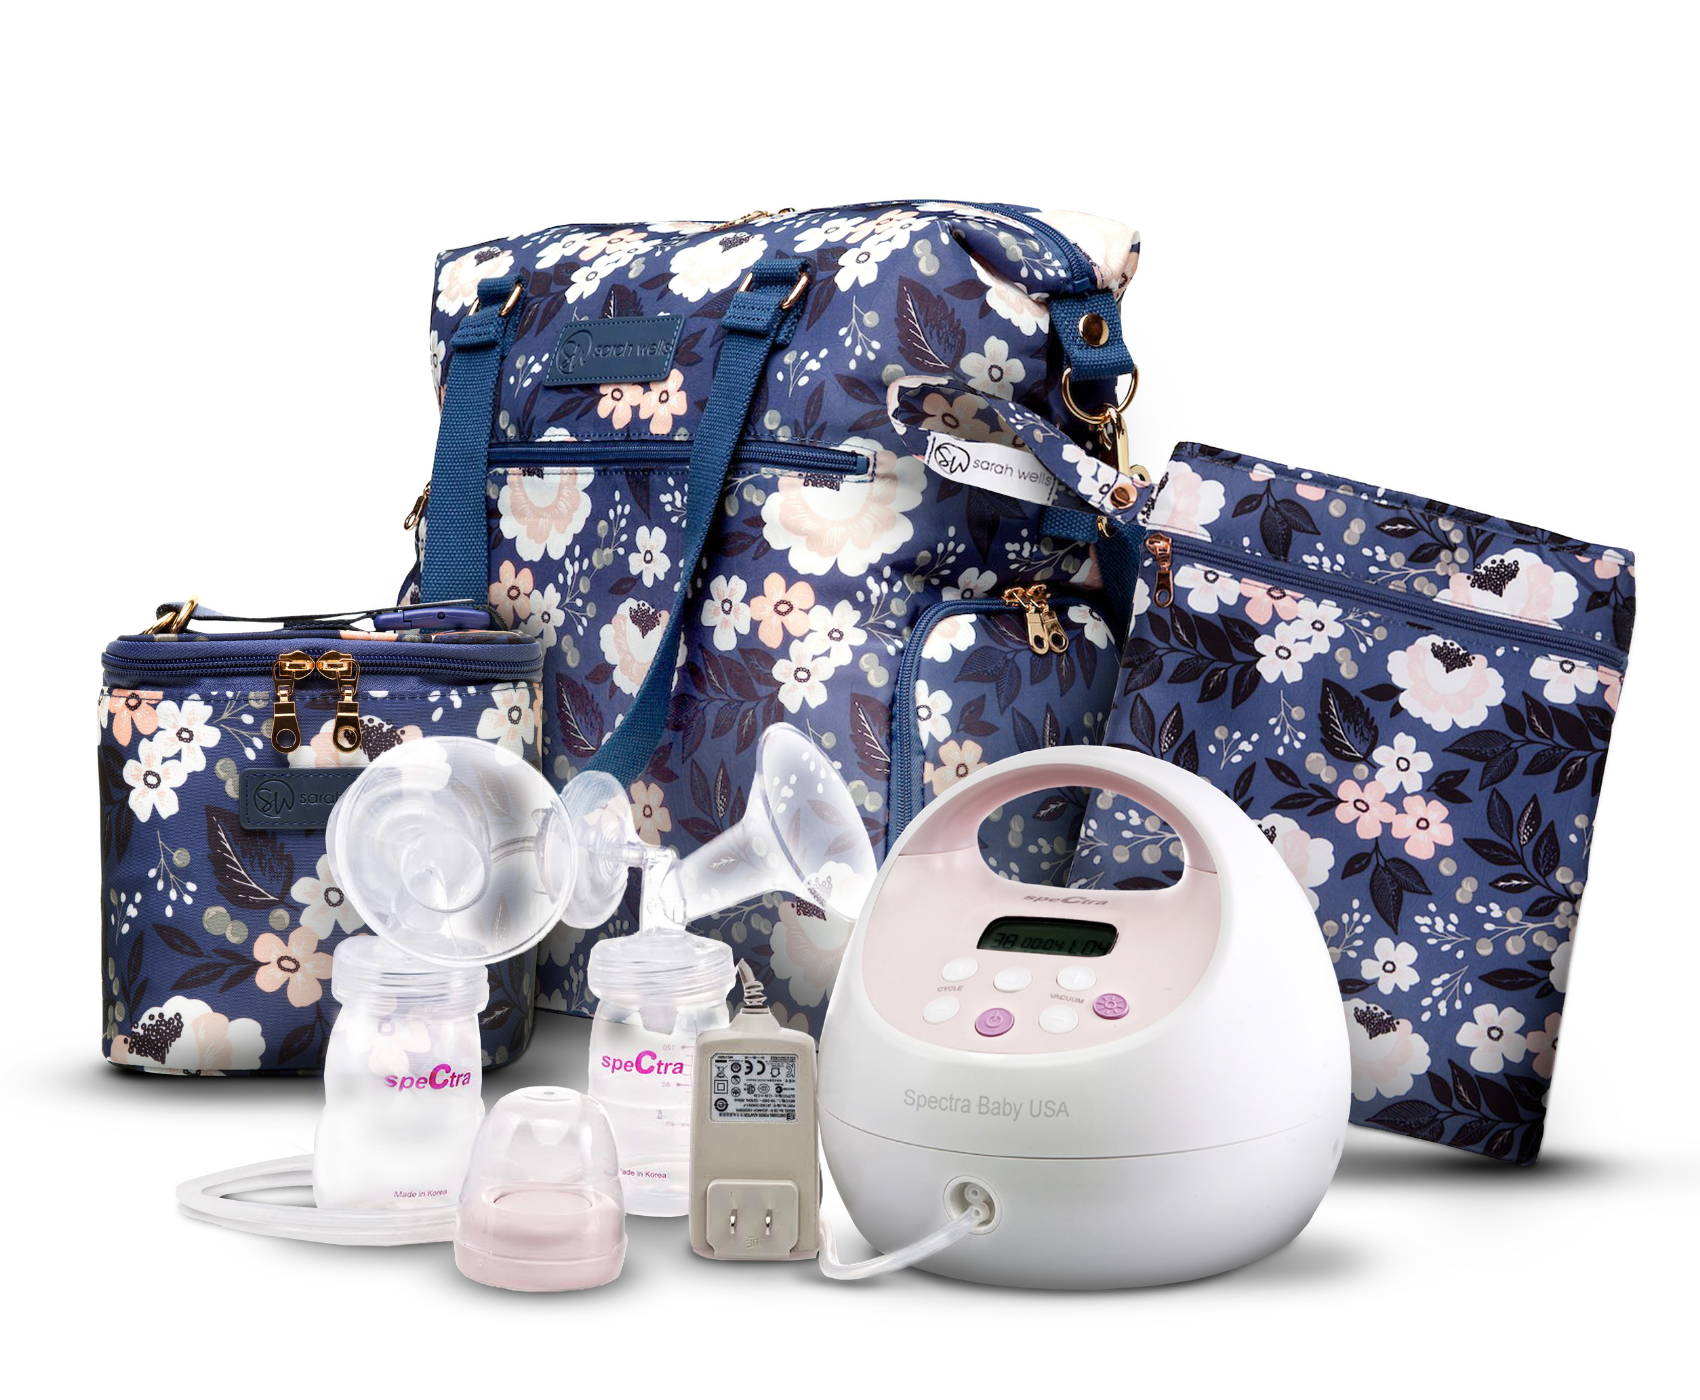 Spectra S2 Plus with Sarah Wells Lizzy Bag All-In Bundle